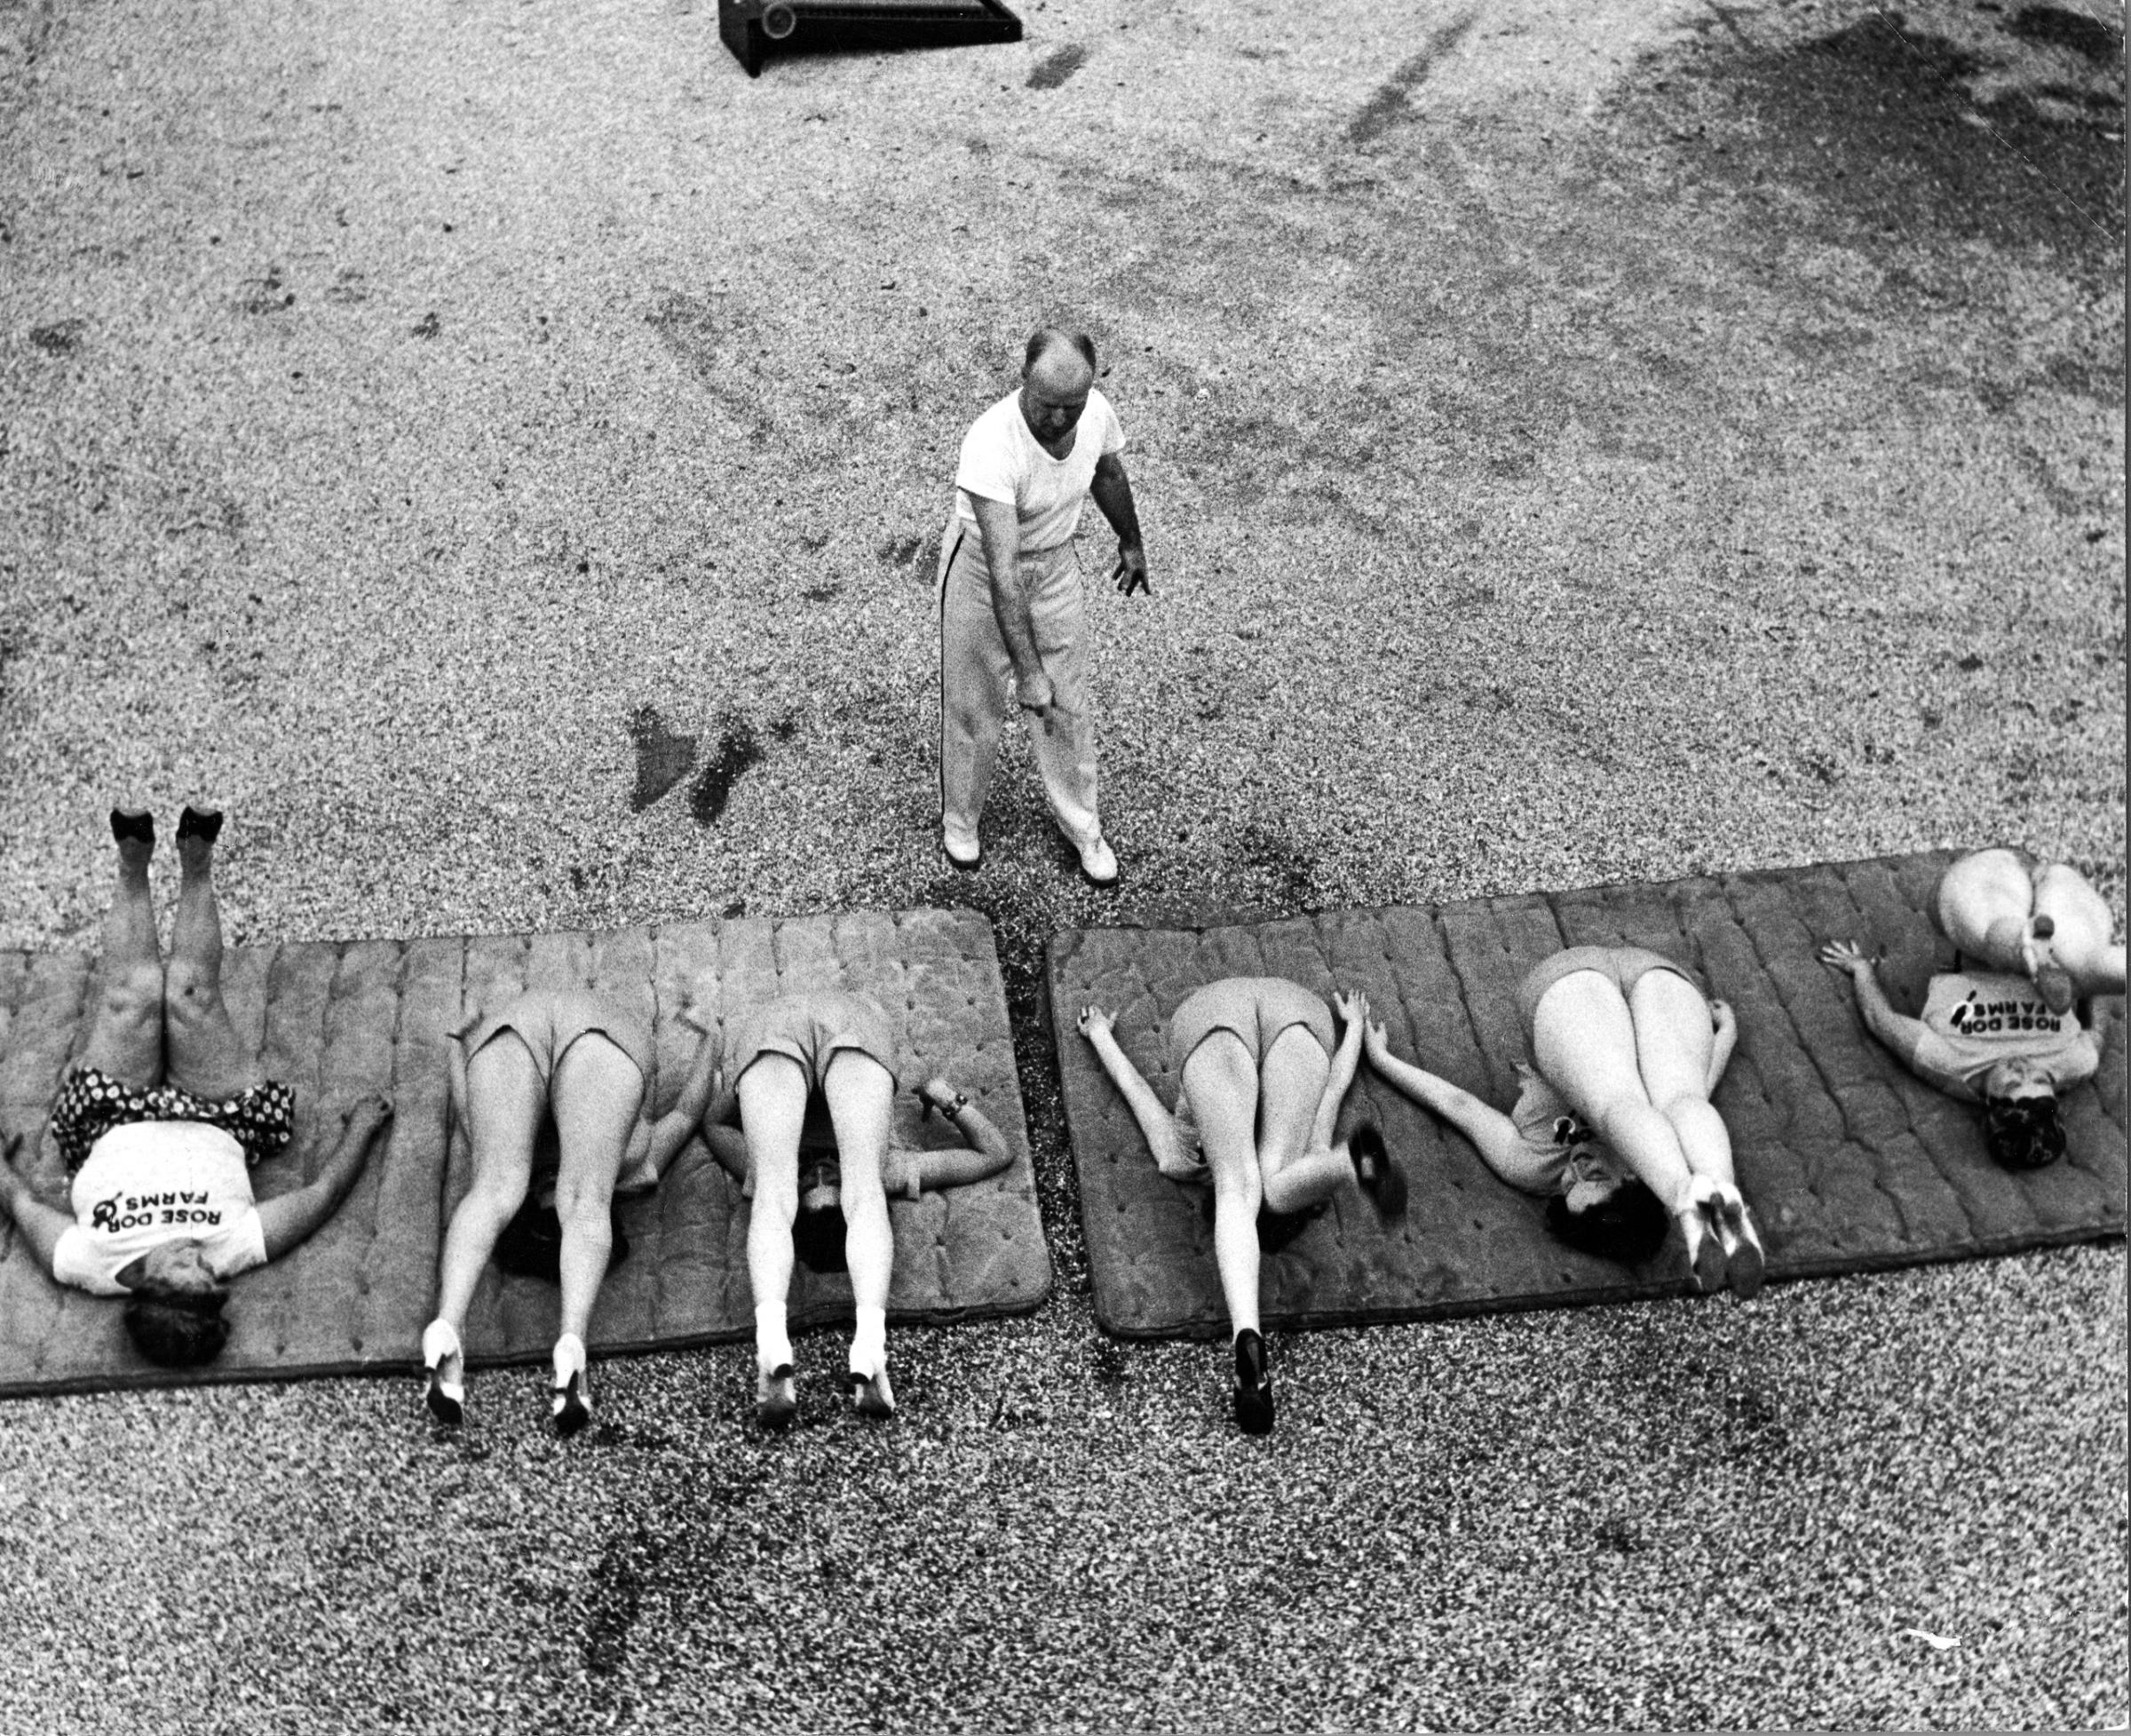 Scene from Rose Dor Farms, a weight loss camp, 1938.